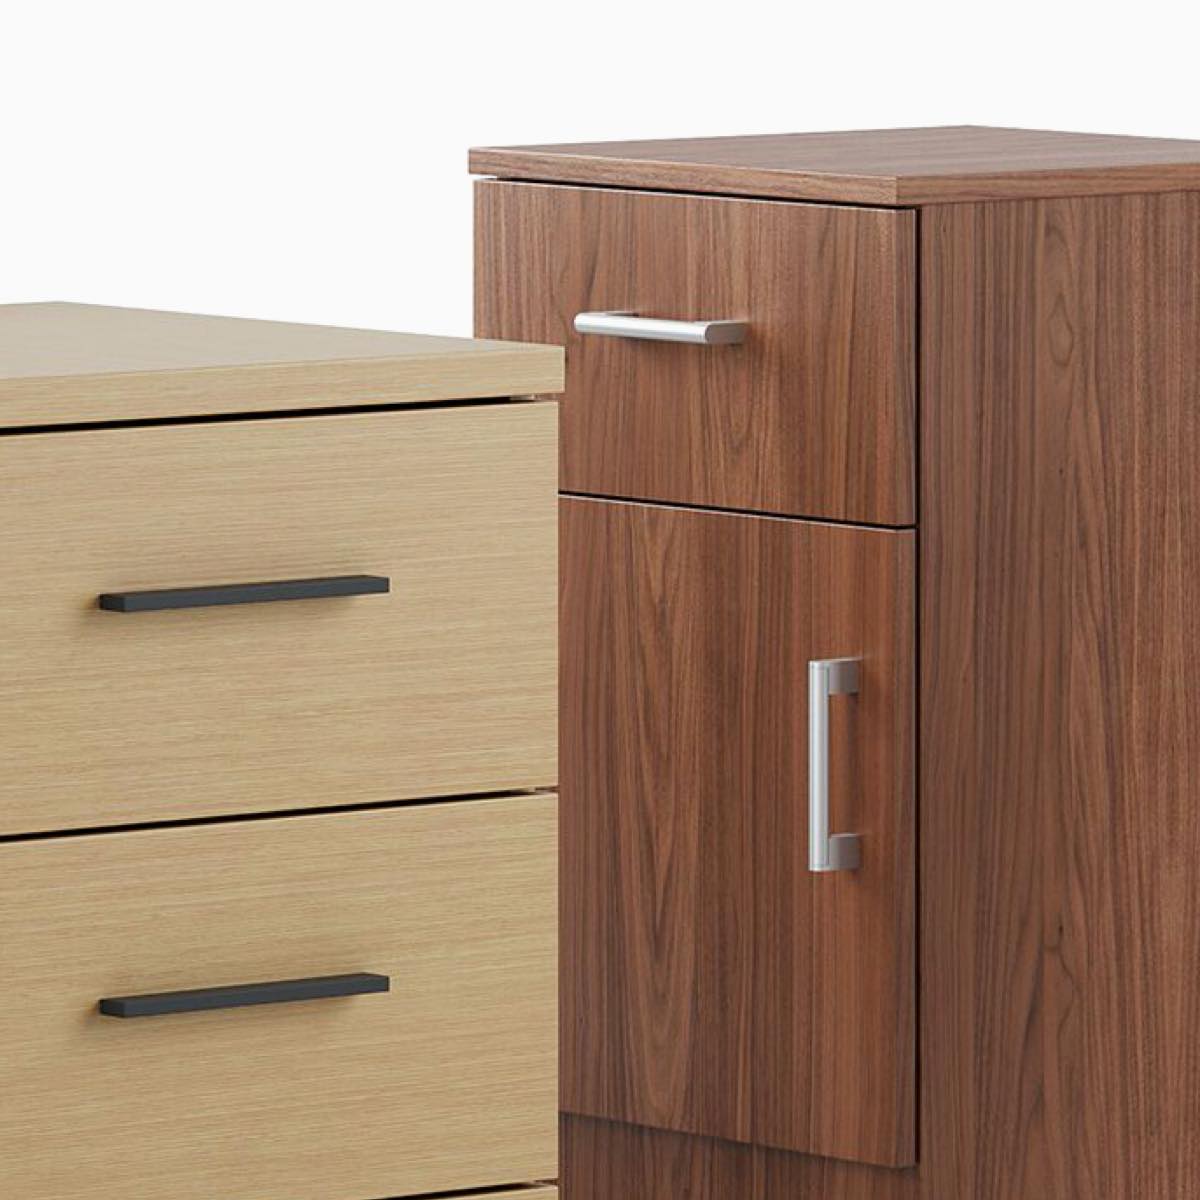 A close-up view of two Nemschoff Bedside Cabinets.